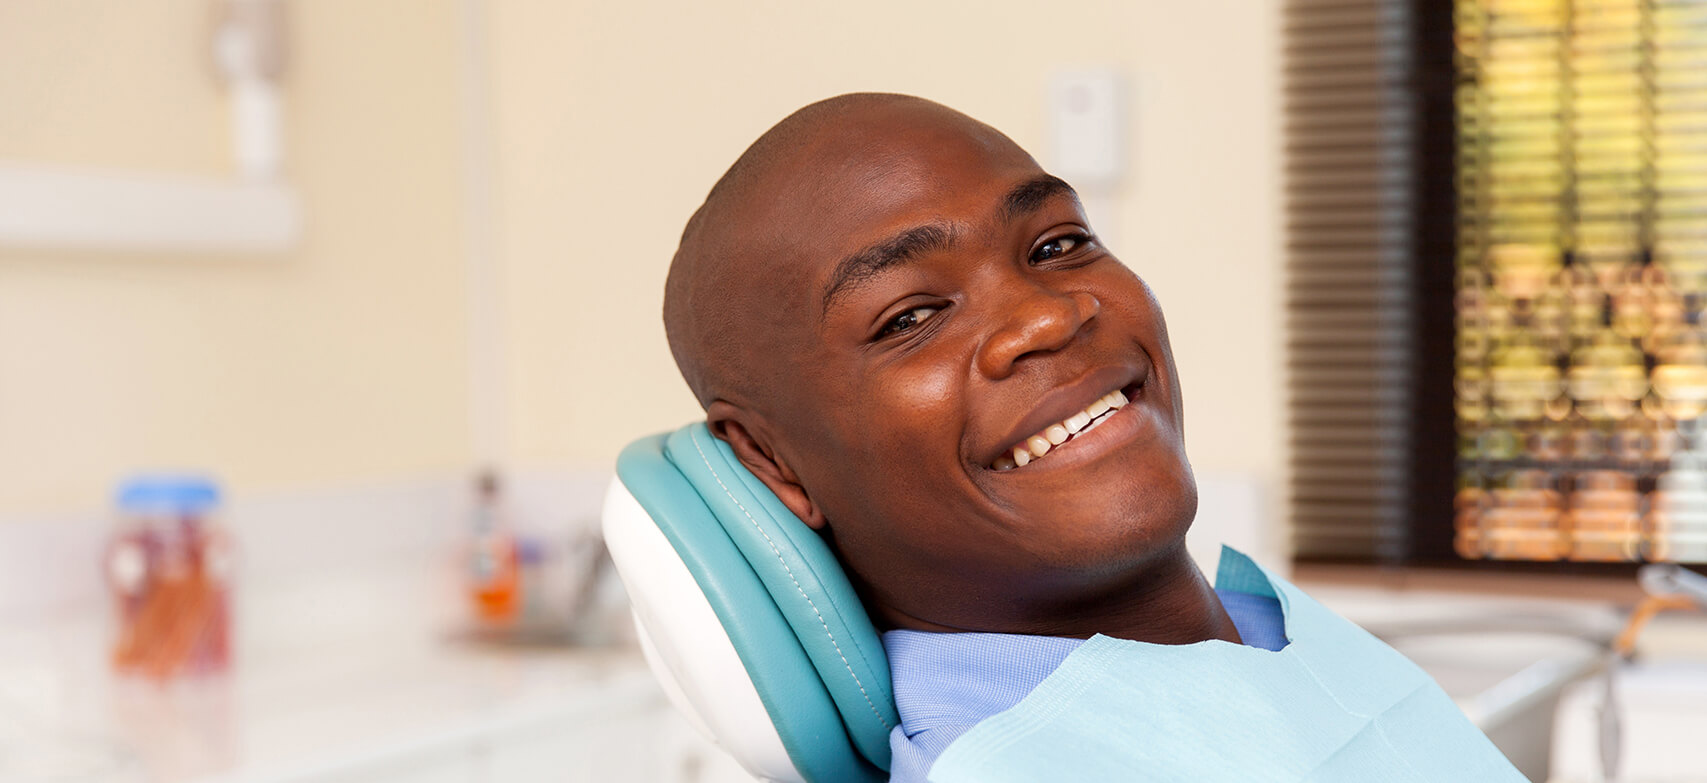 smiling man sitting in a dental chair